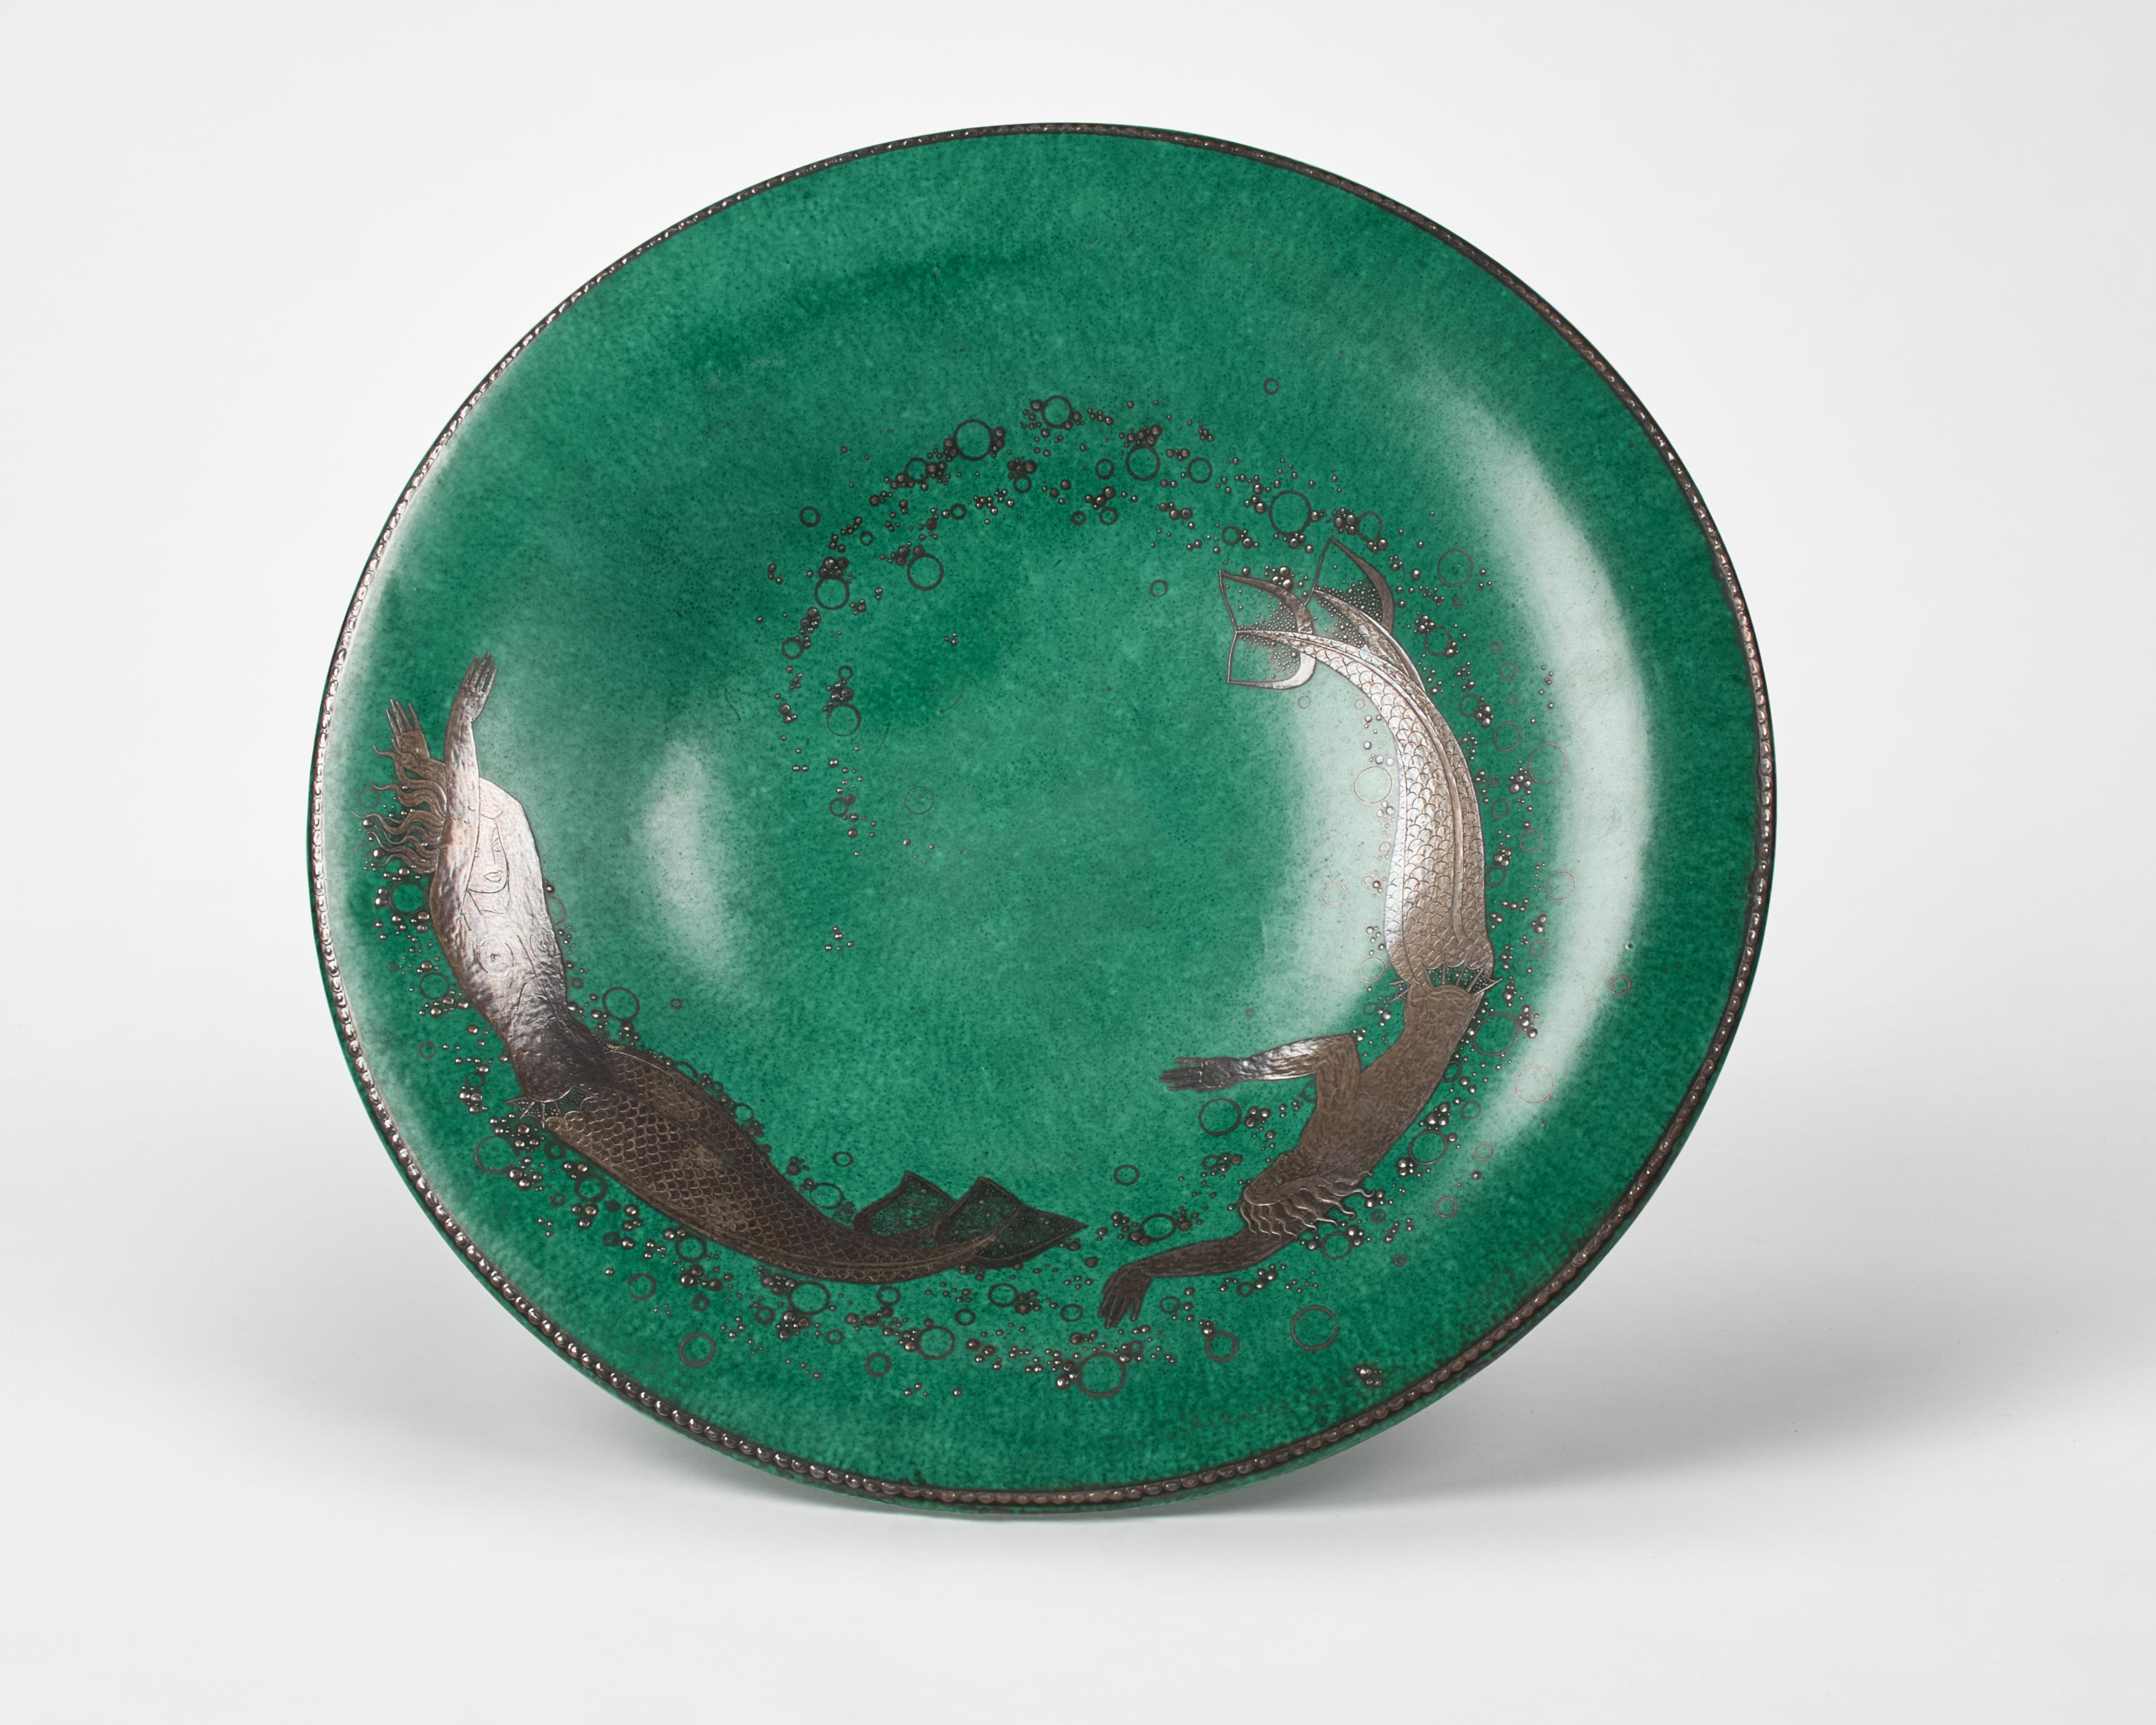 This beautiful piece is part of the artist's Argenta Series, produced for the Gustavsberg Factory, which first won him major success. The series includes everything from ashtrays to 60 kg urns-- primarily in a green glaze with silver details, circa